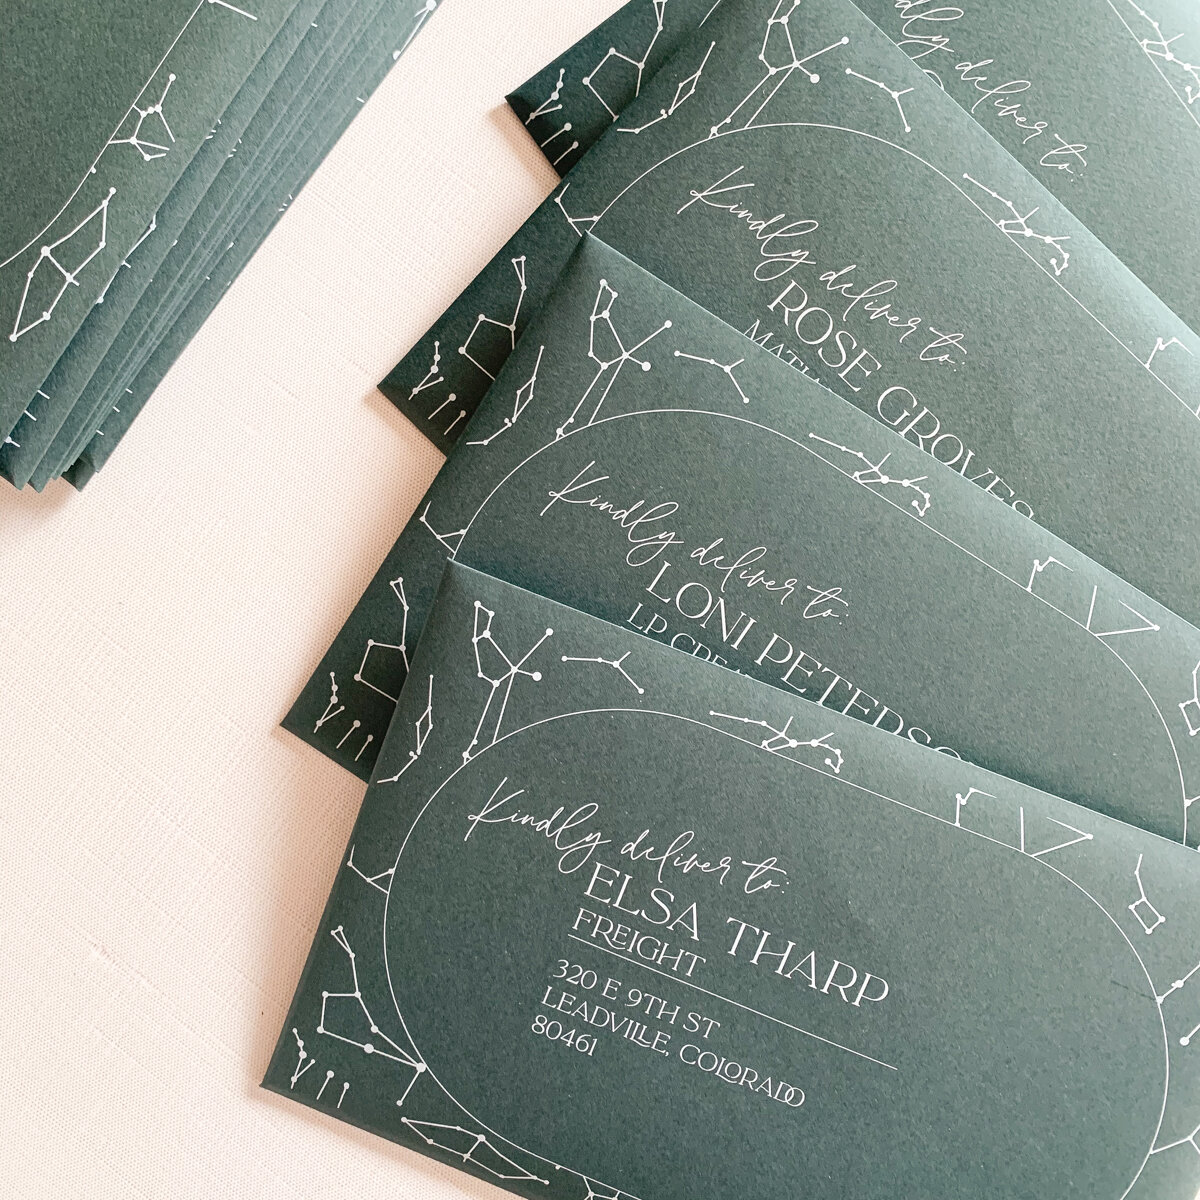 These gorgeous dark green envelopes not only had fun constellations printed on the front but, using variable printing, we were able get all the addresses printed in coordinating typefaces to match the fun invites inside!